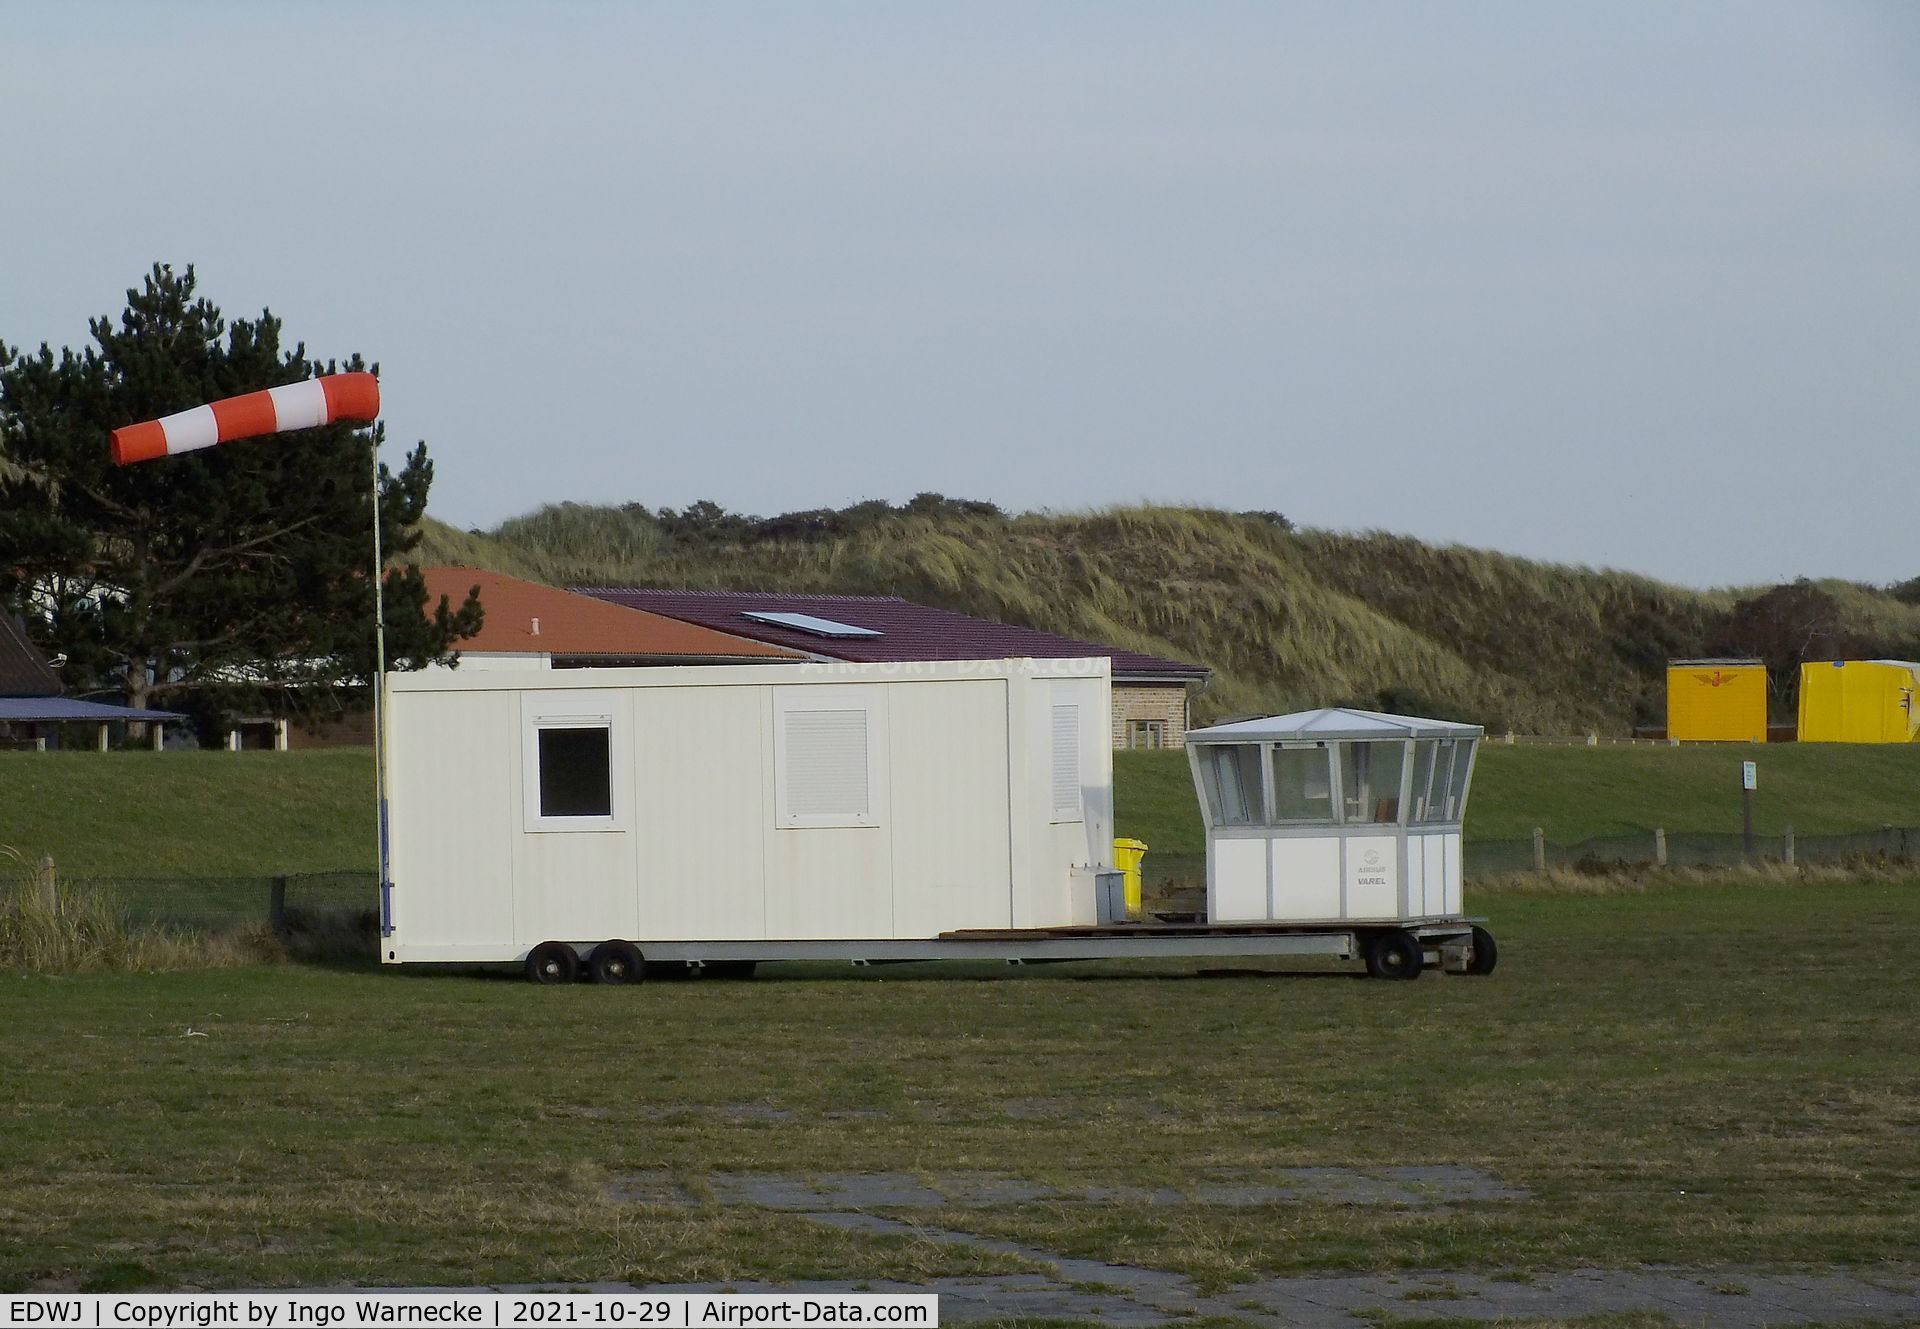 Juist Airport, Juist Germany (EDWJ) - mobile tower on trailer at Juist airfield